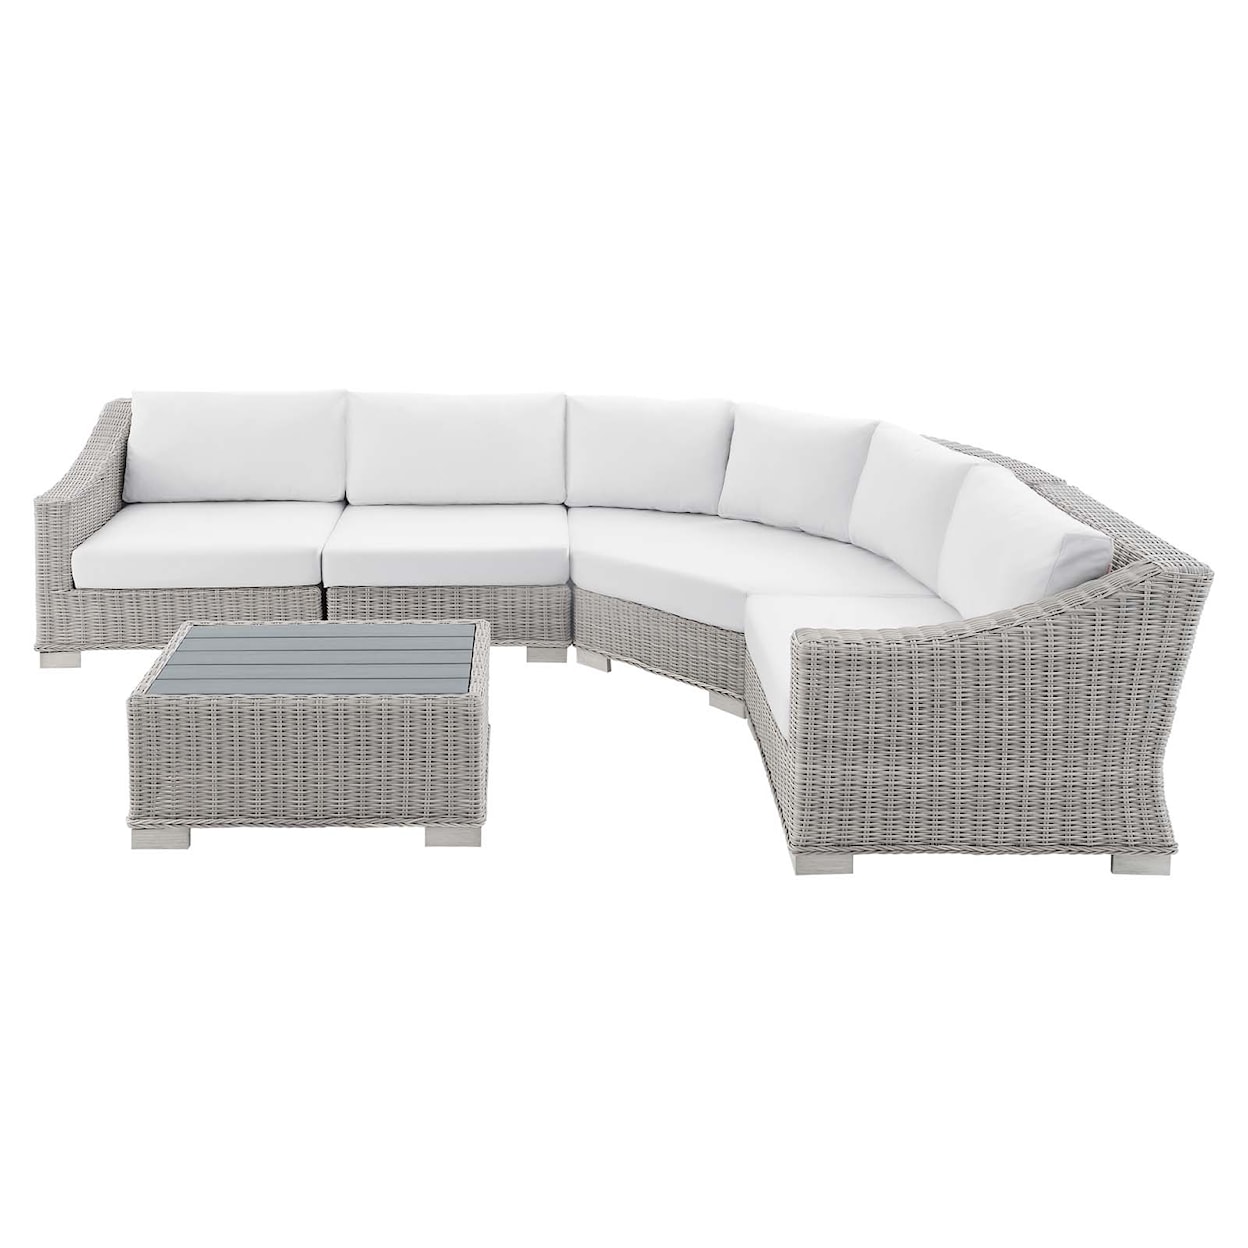 Modway Conway Outdoor 5-Piece Sectional Sofa Set